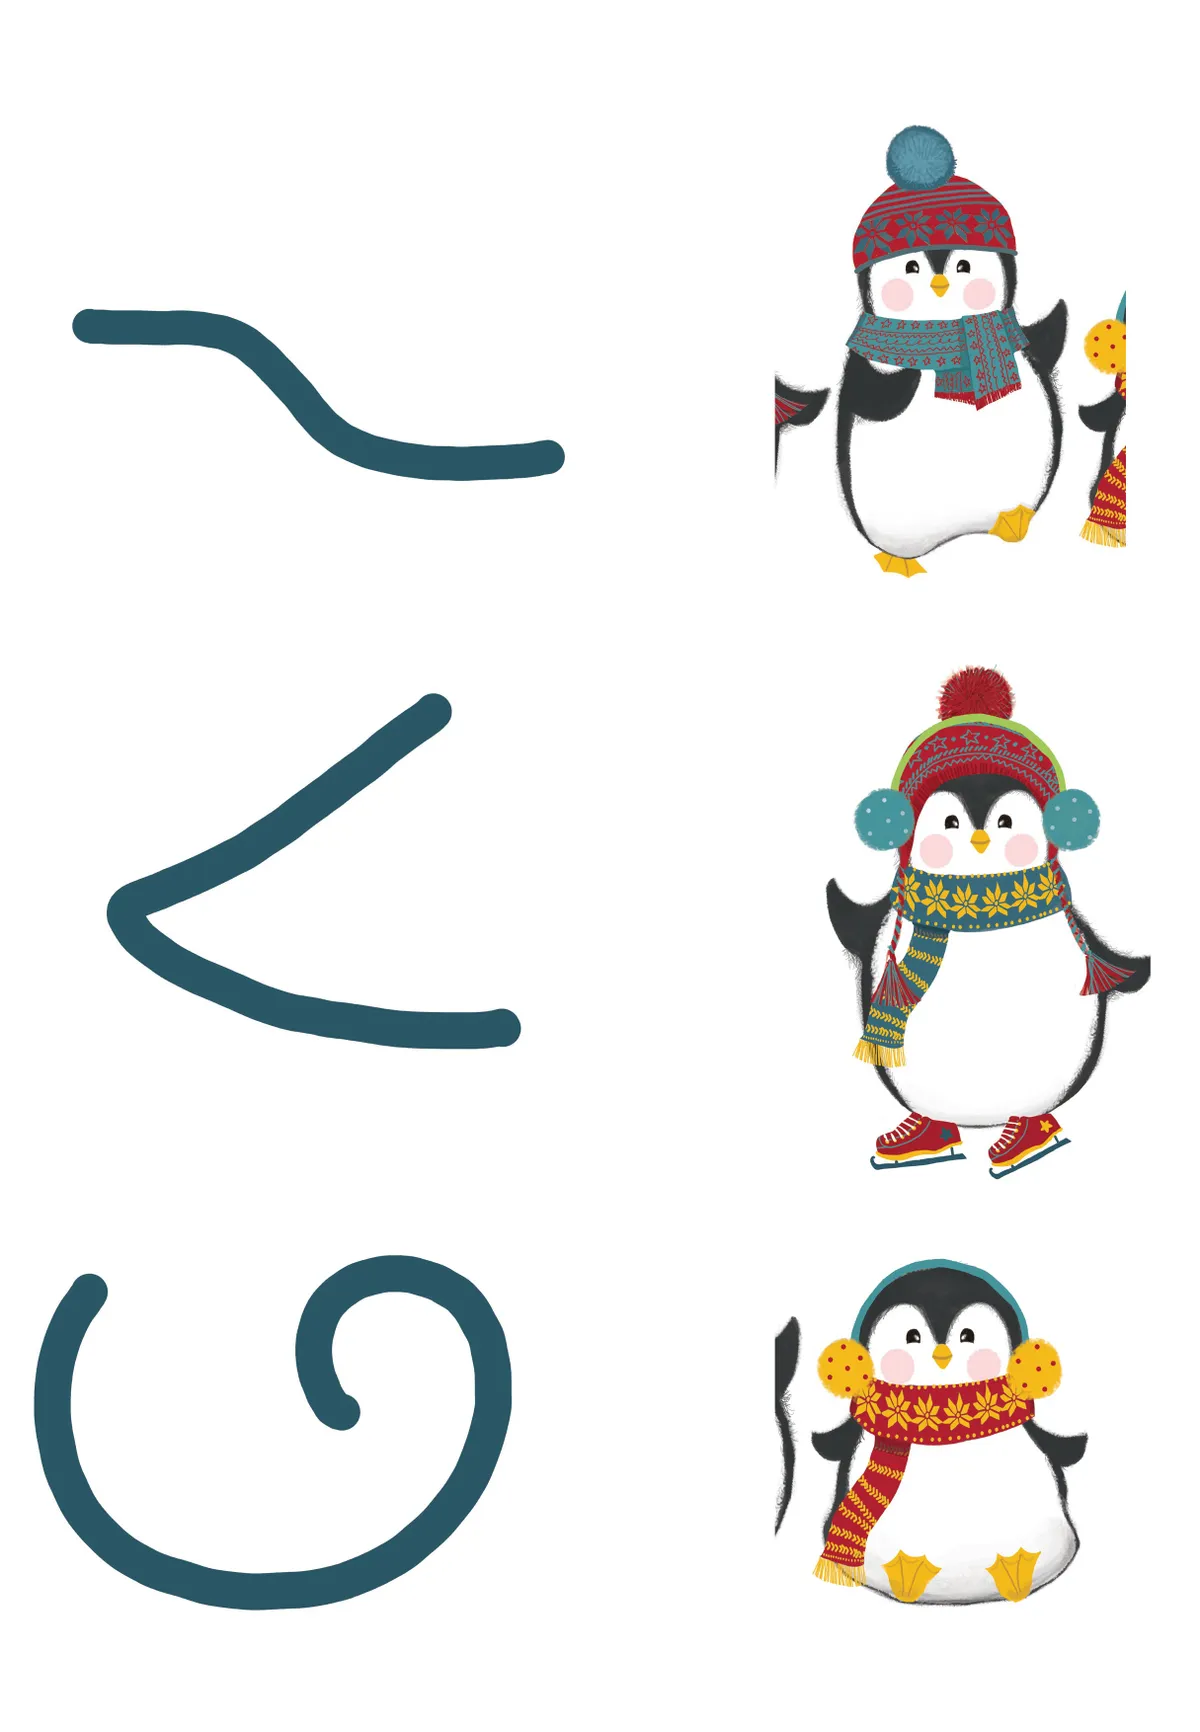 Penguins wearing scarves and hats